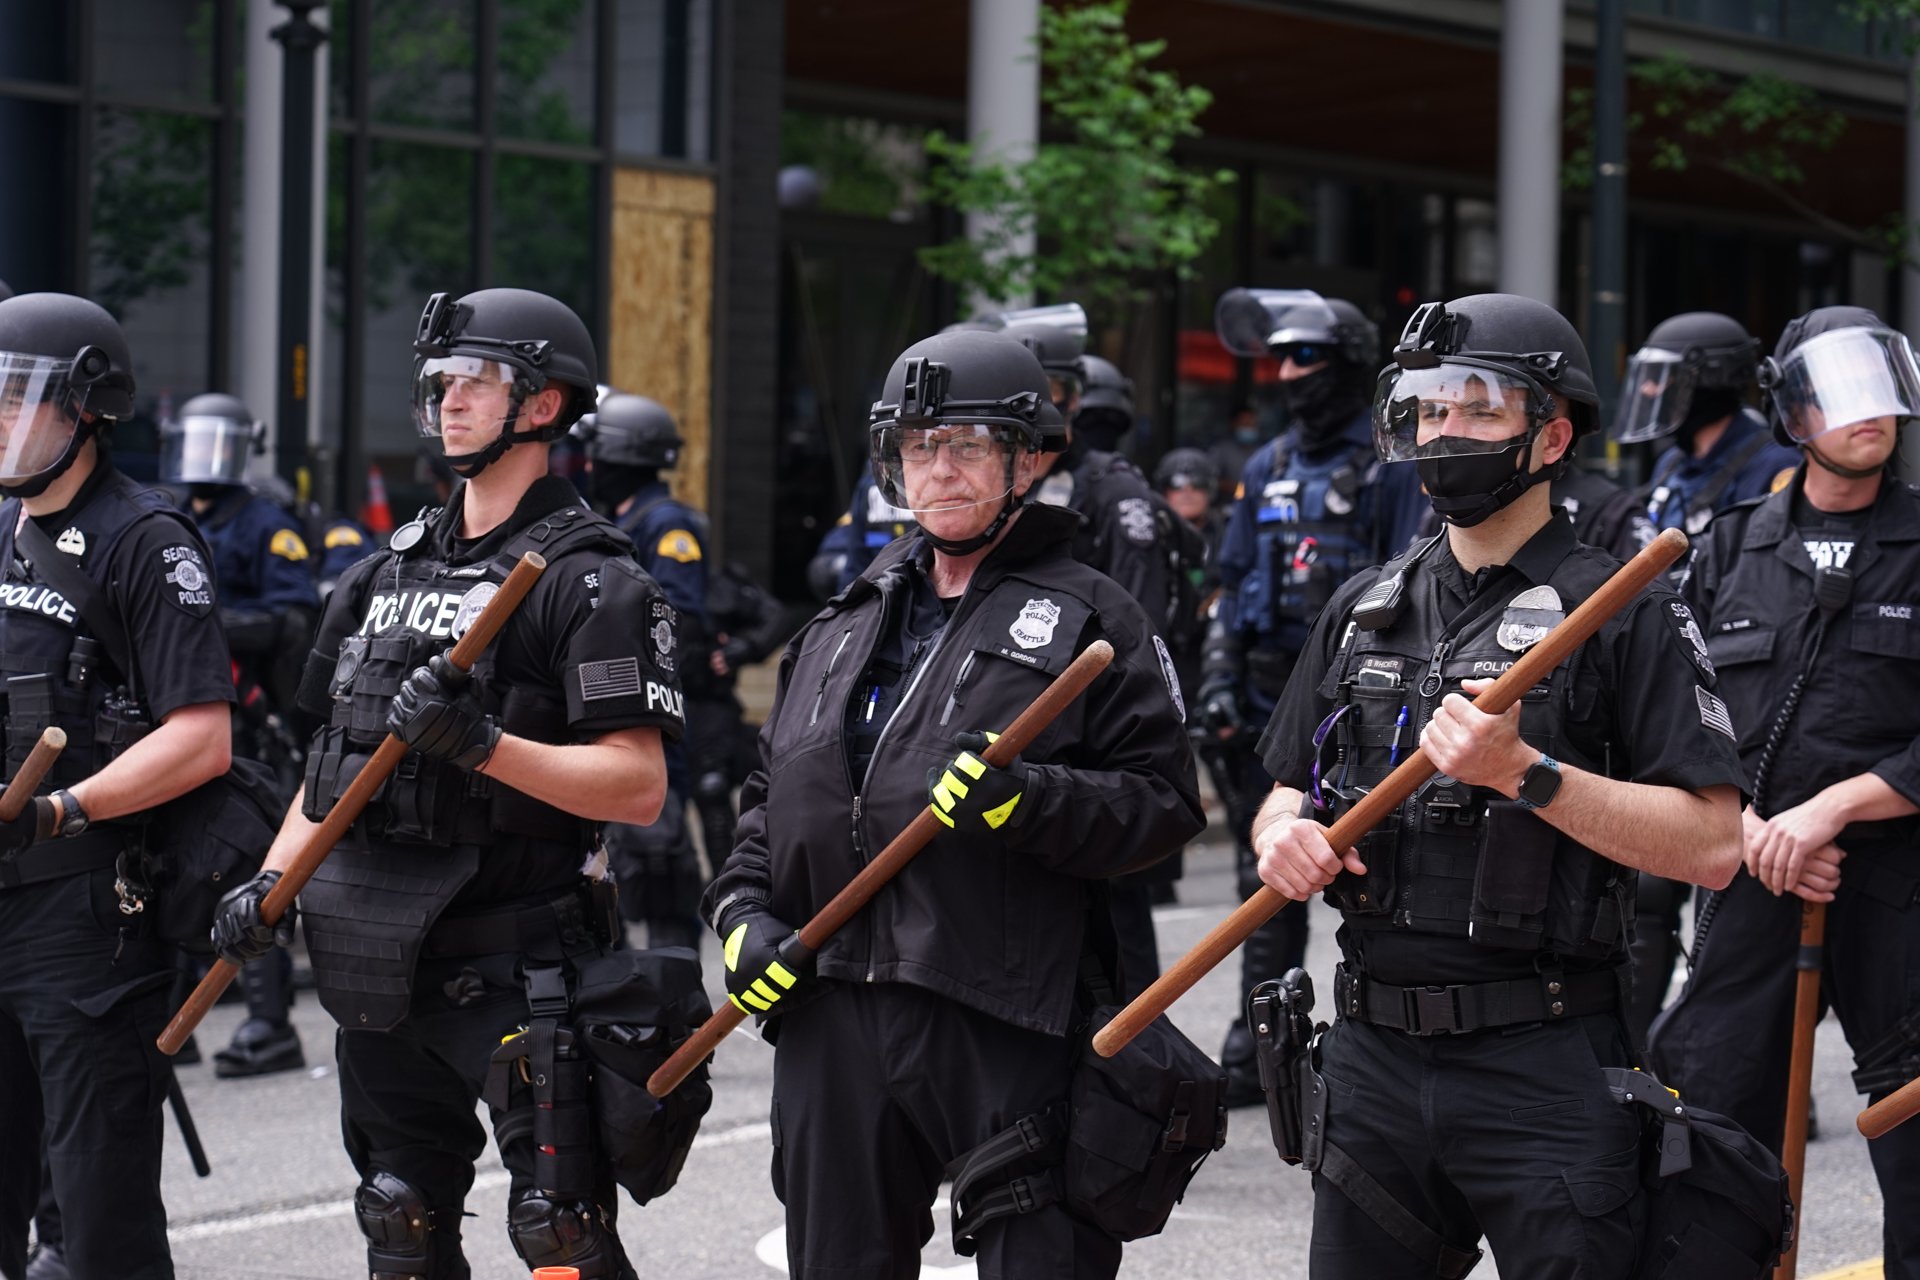  A frontline of Seattle Police Officers during protests following the death of George Floyd. July 2020 in Downtown Seattle.  